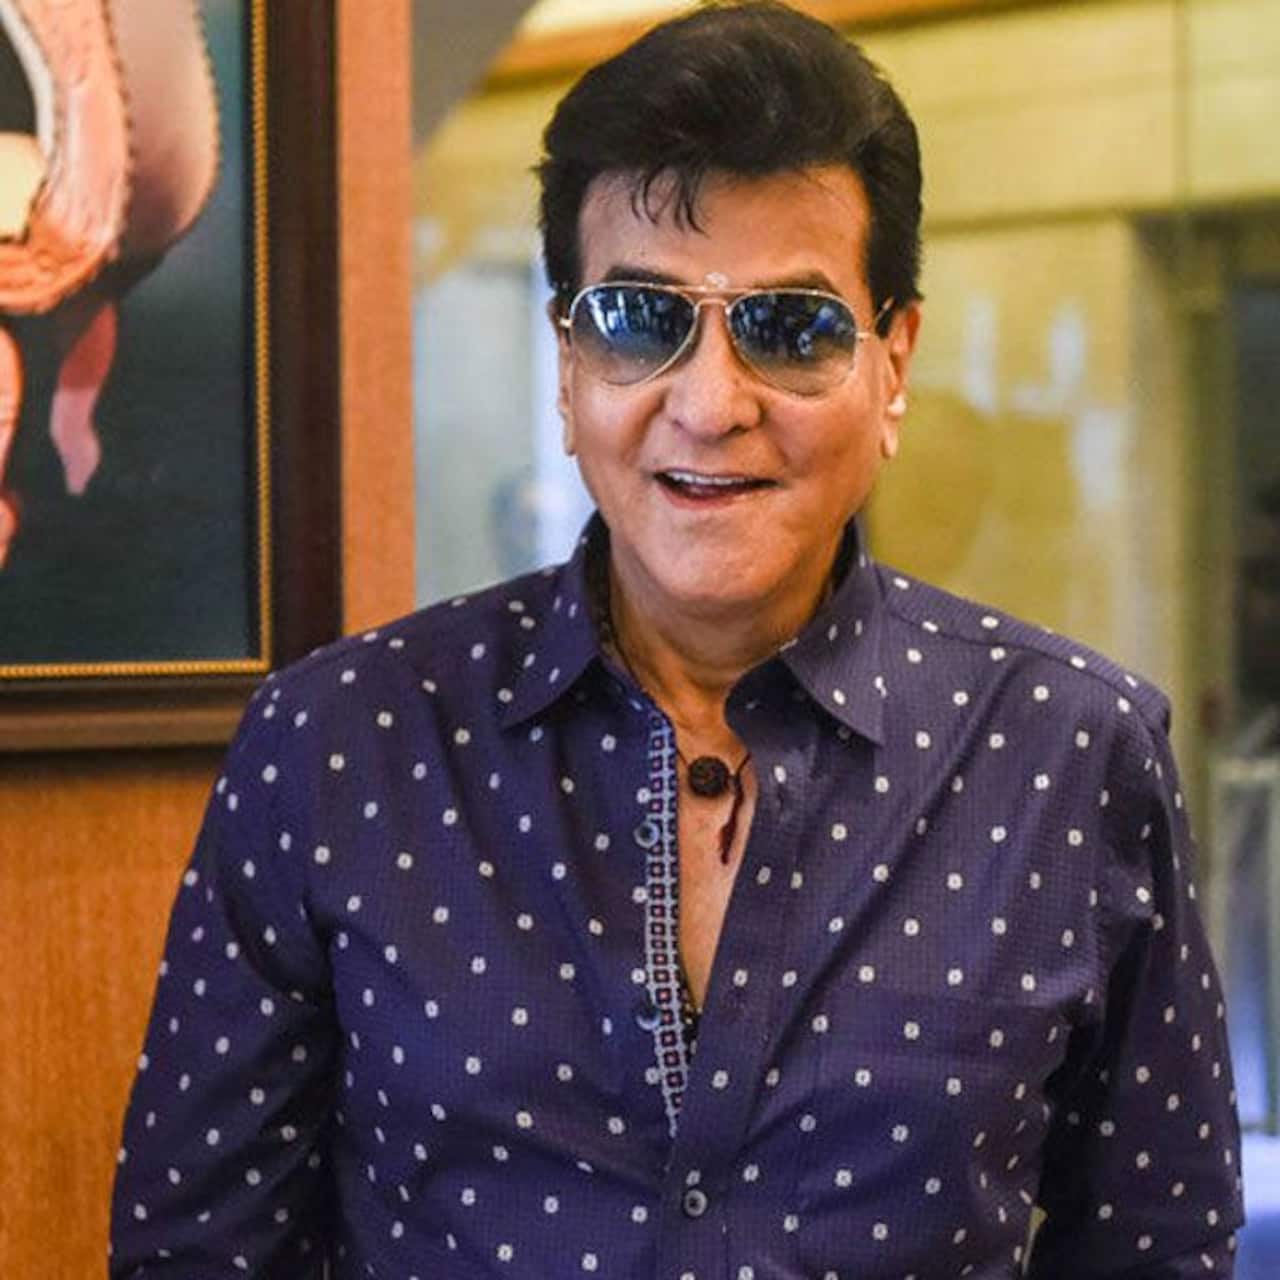 Producer Anand Pandit showers respect on Jeetendra, says, 'What I owe him is intangible'